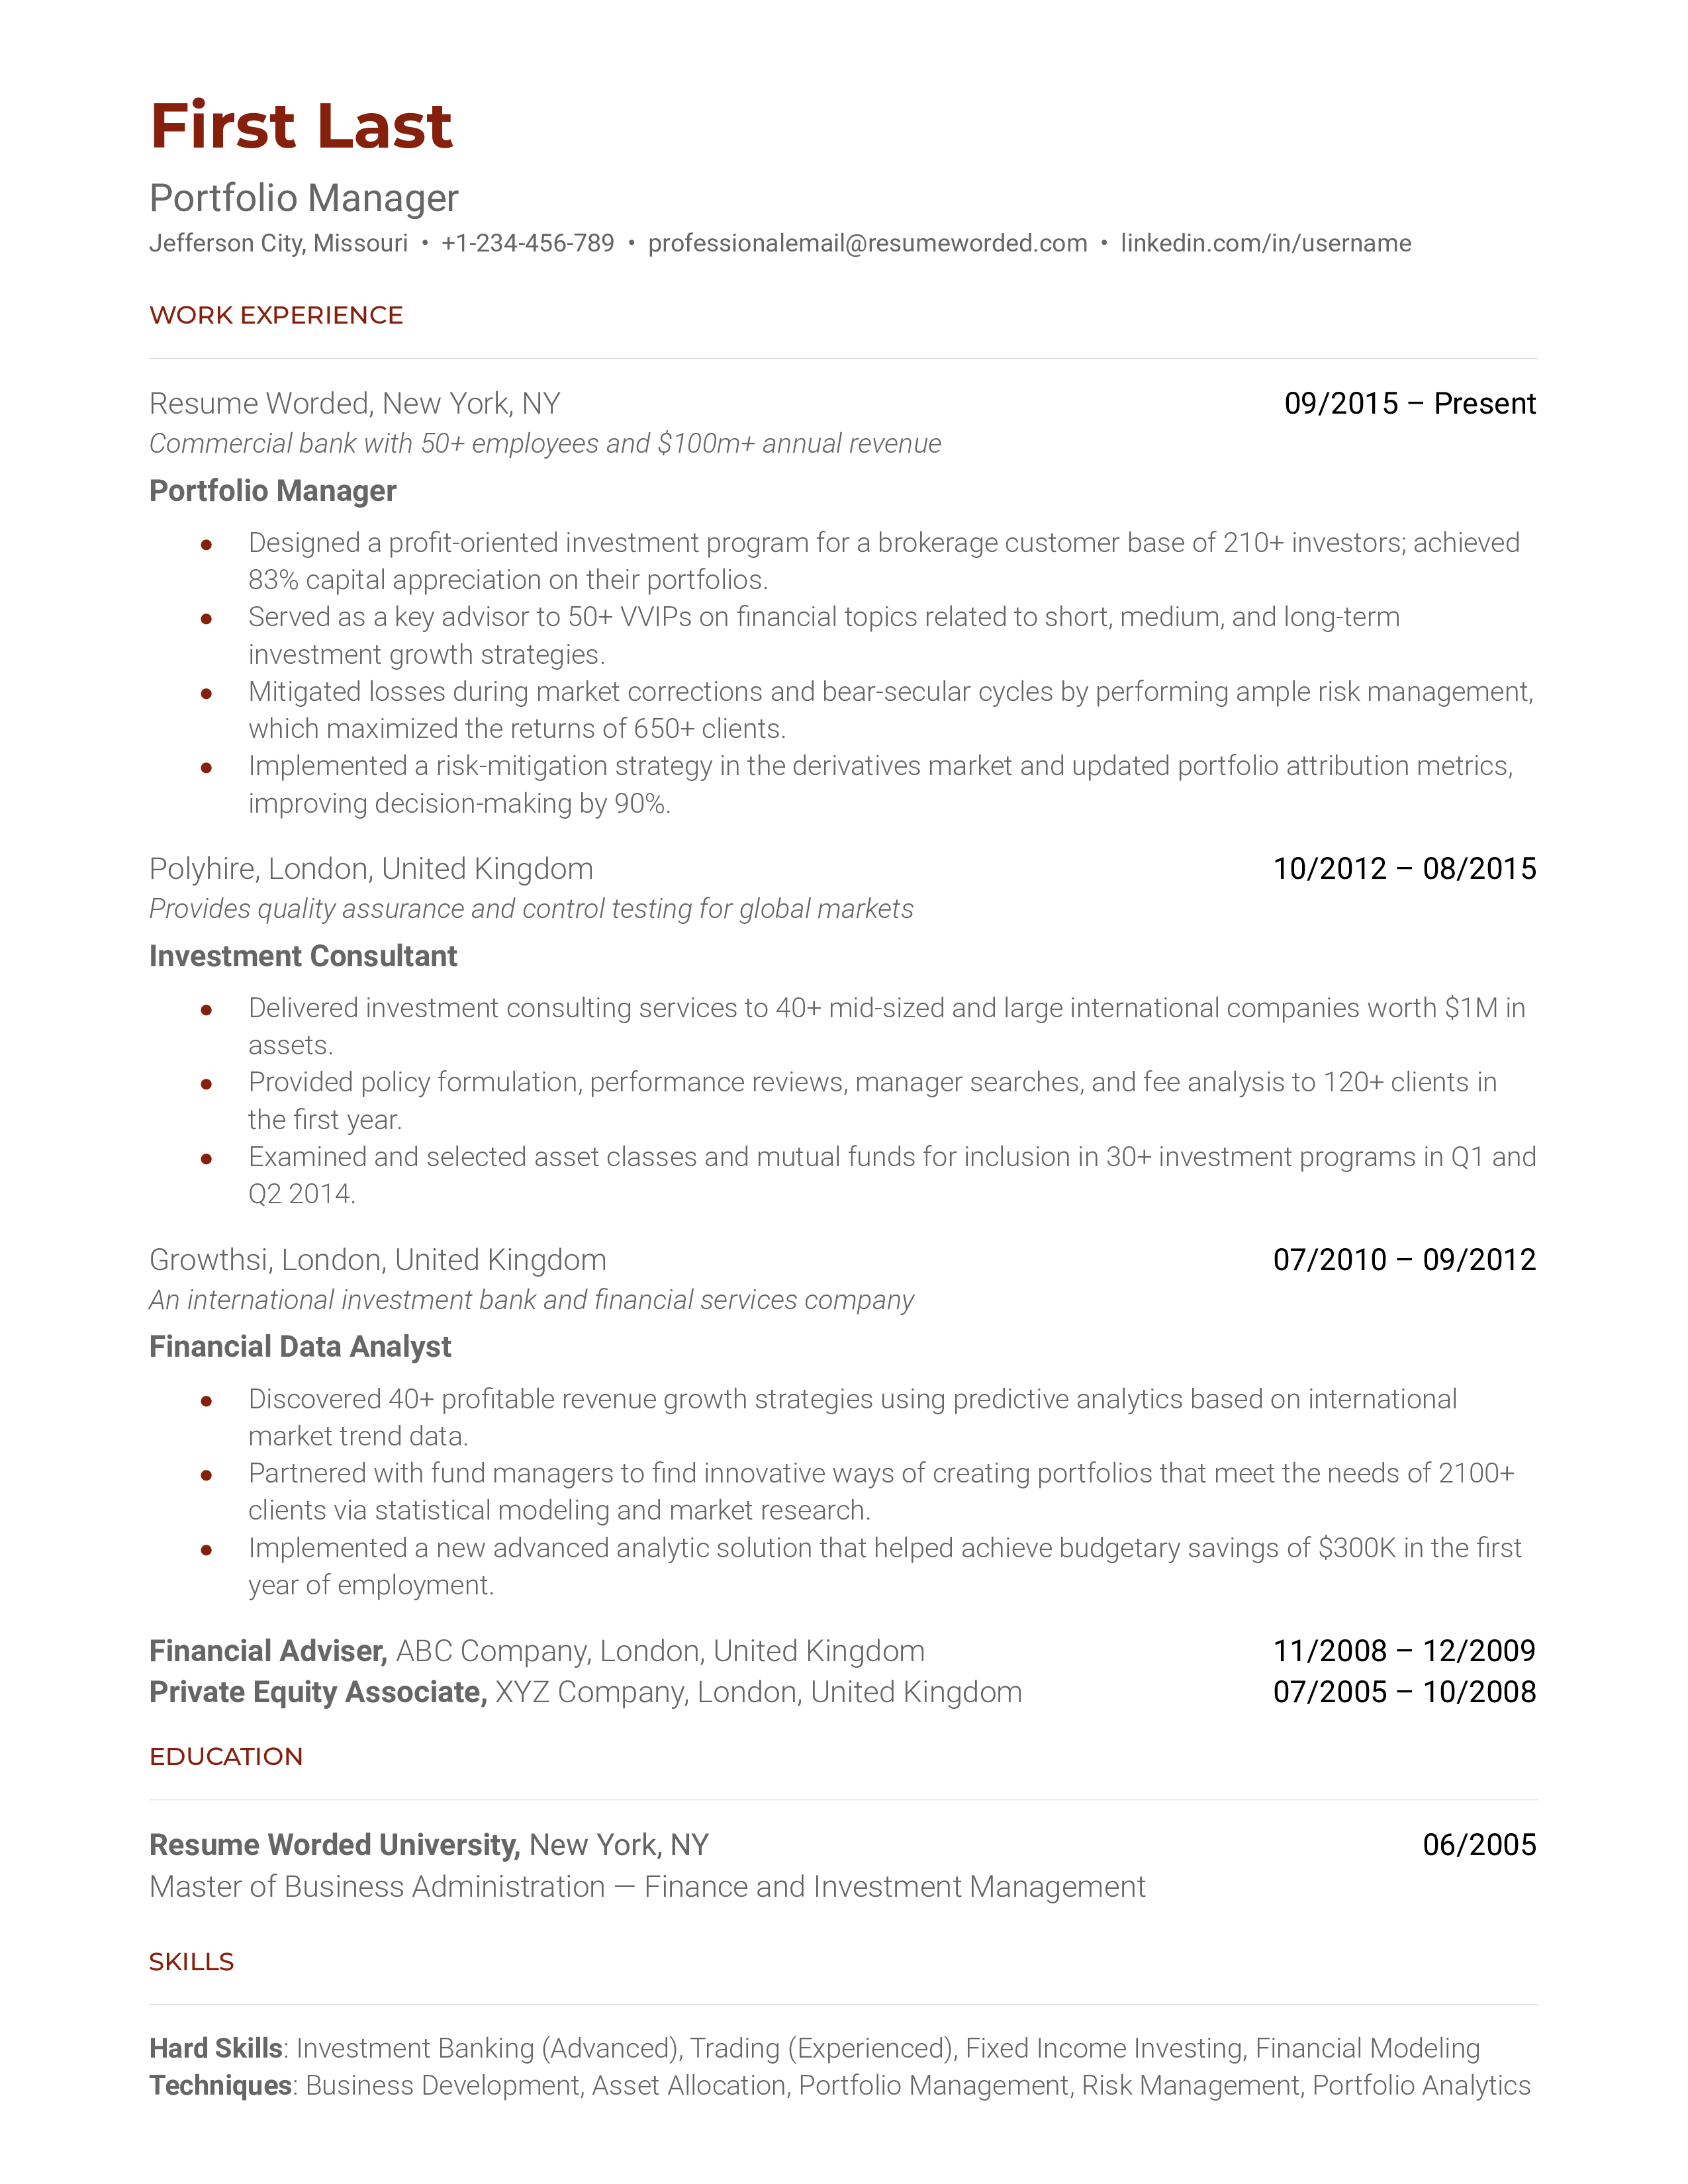 A resume for a portfolio manager with a bachelor's in business management and experience as a portfolio analyst.